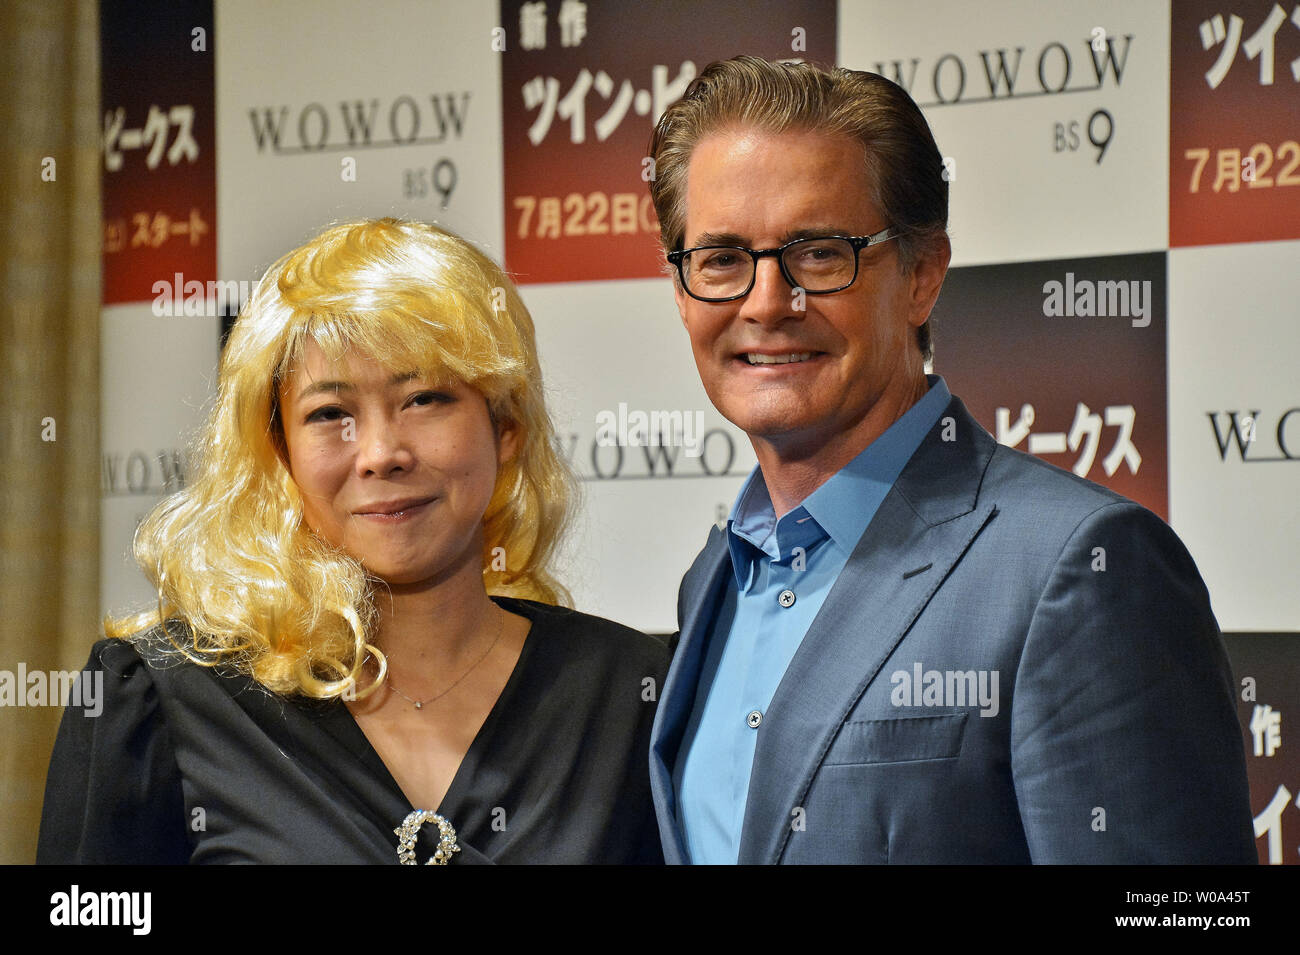 Actor Kyle Maclachlan And Japanese Comedian Tsubaki Oniyakko Attend A Press Conference For The Tv Drama Twin Peaks The Return In Tokyo Japan On July 12 17 This Dorama Series Will Broadcast